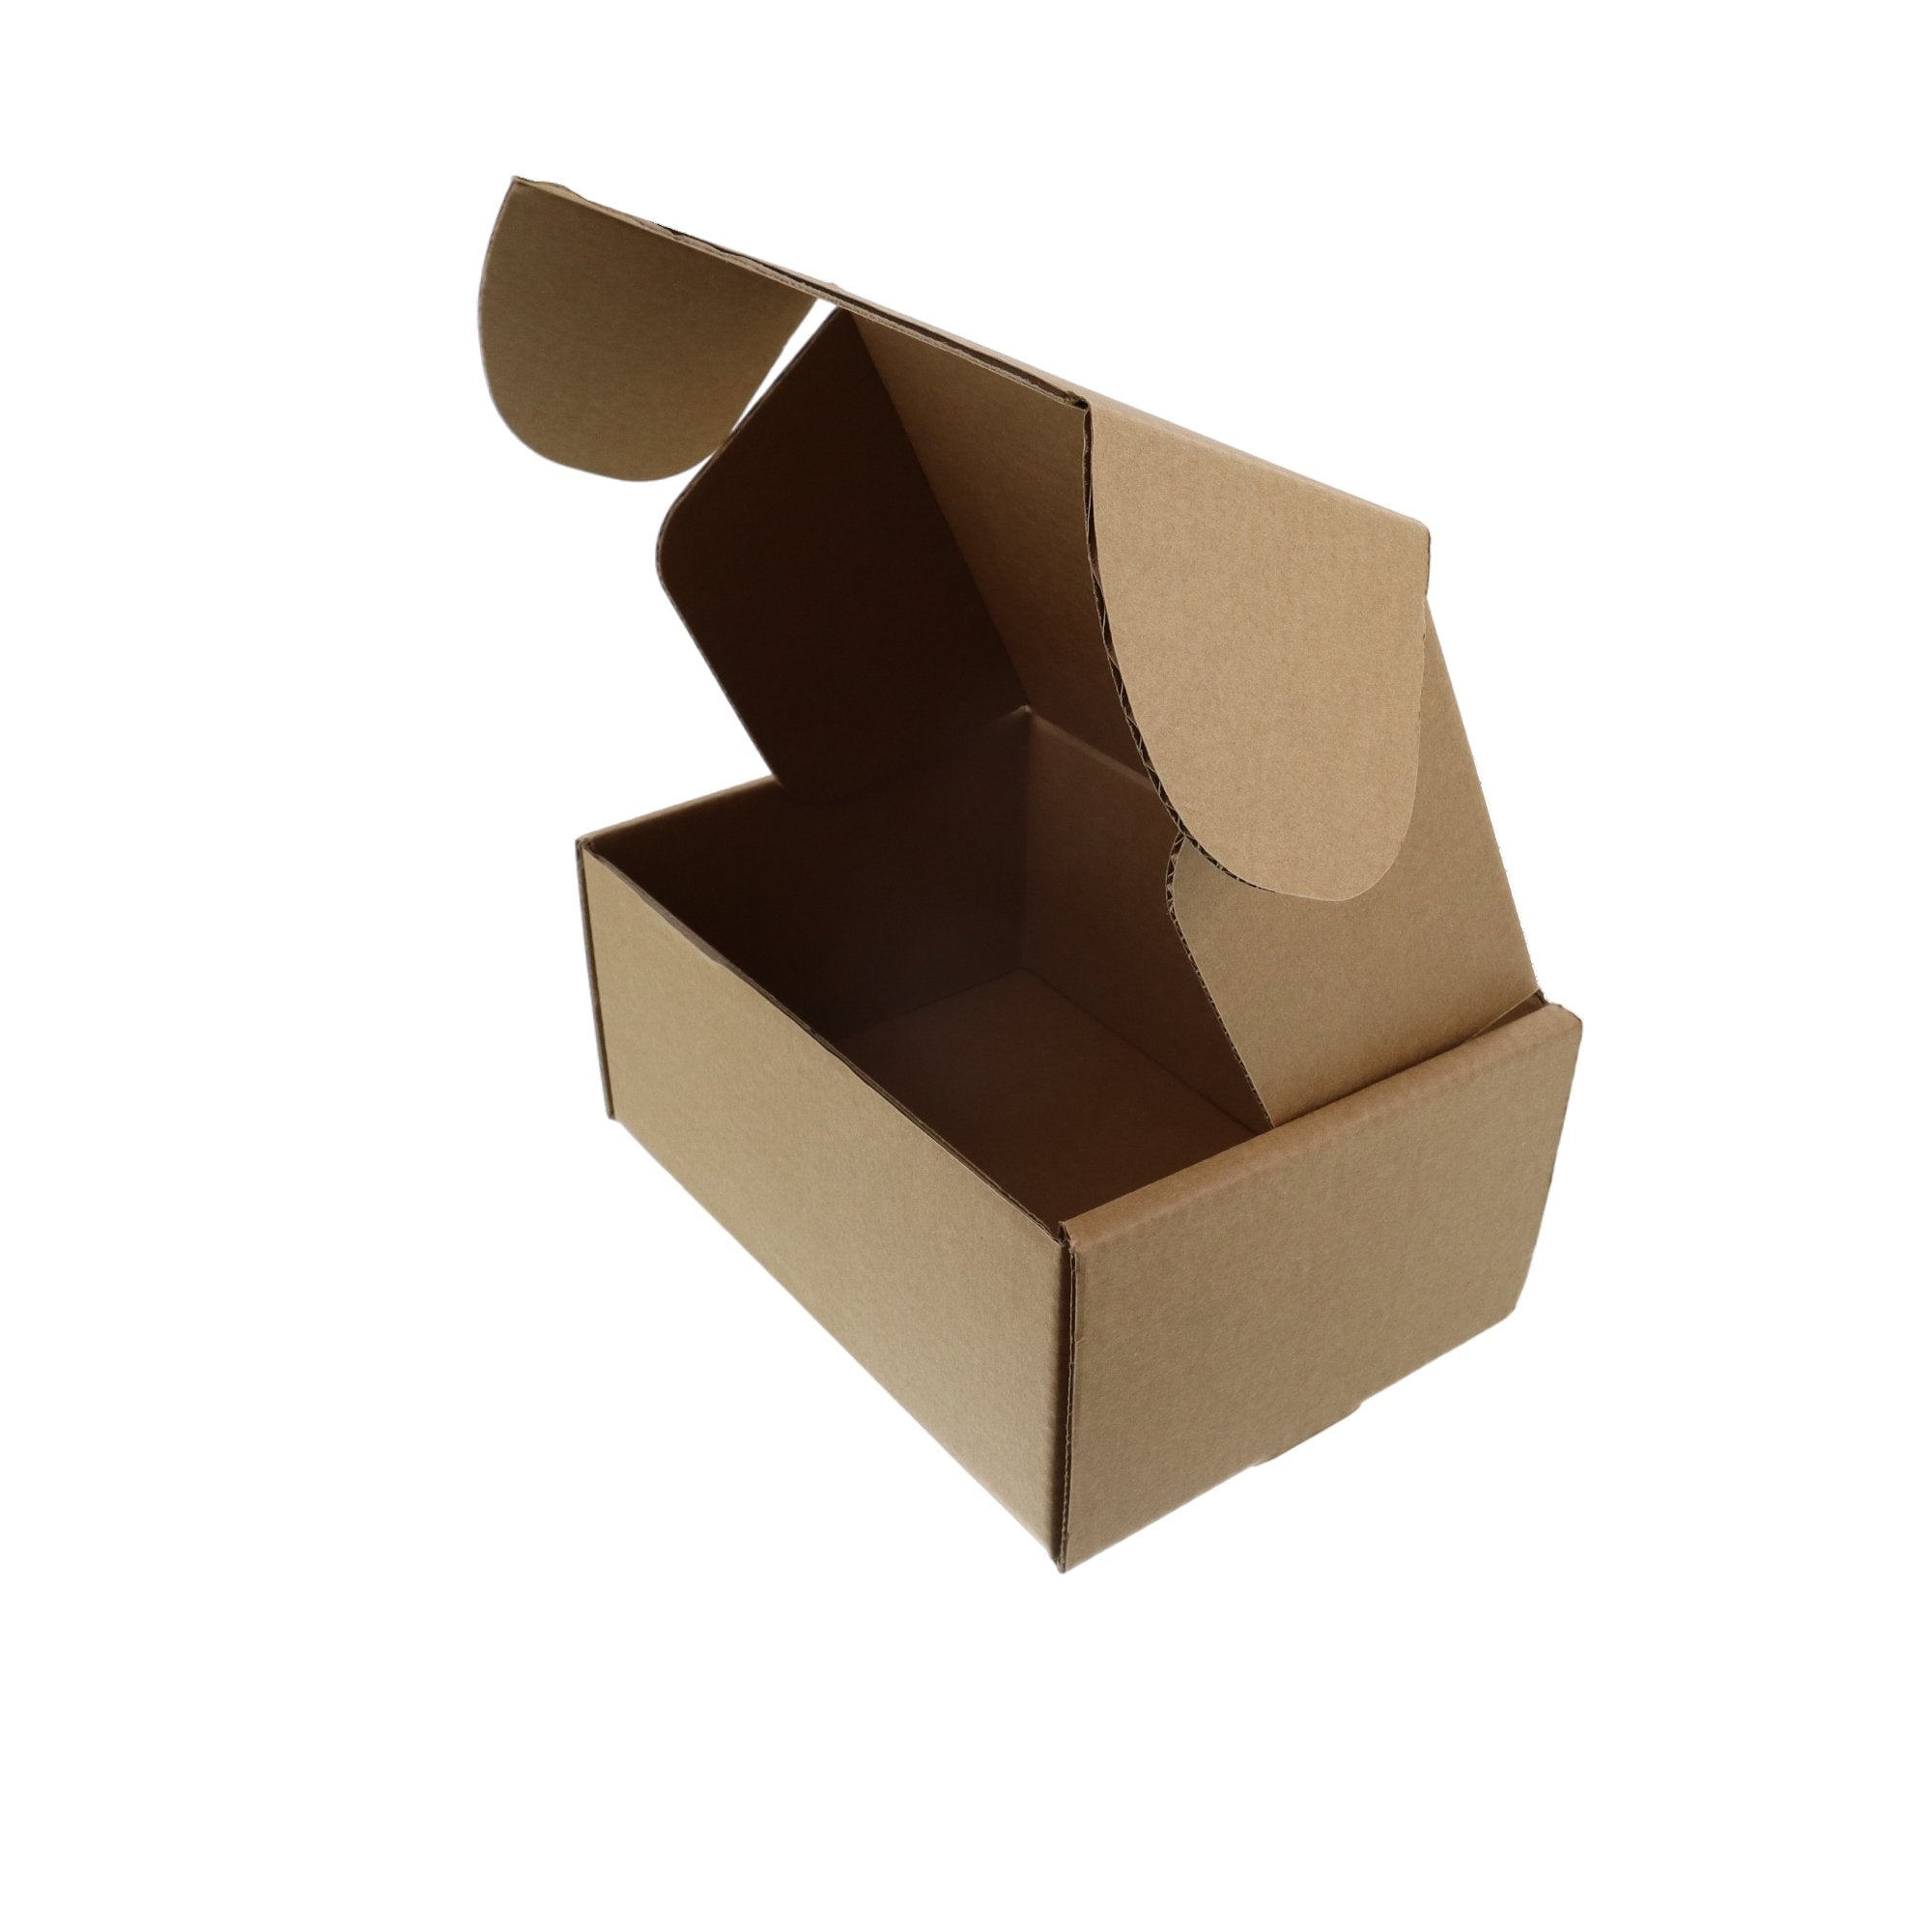 Budget Mailer 3 One Piece Mailing Box [Express Value Buy] - PackQueen